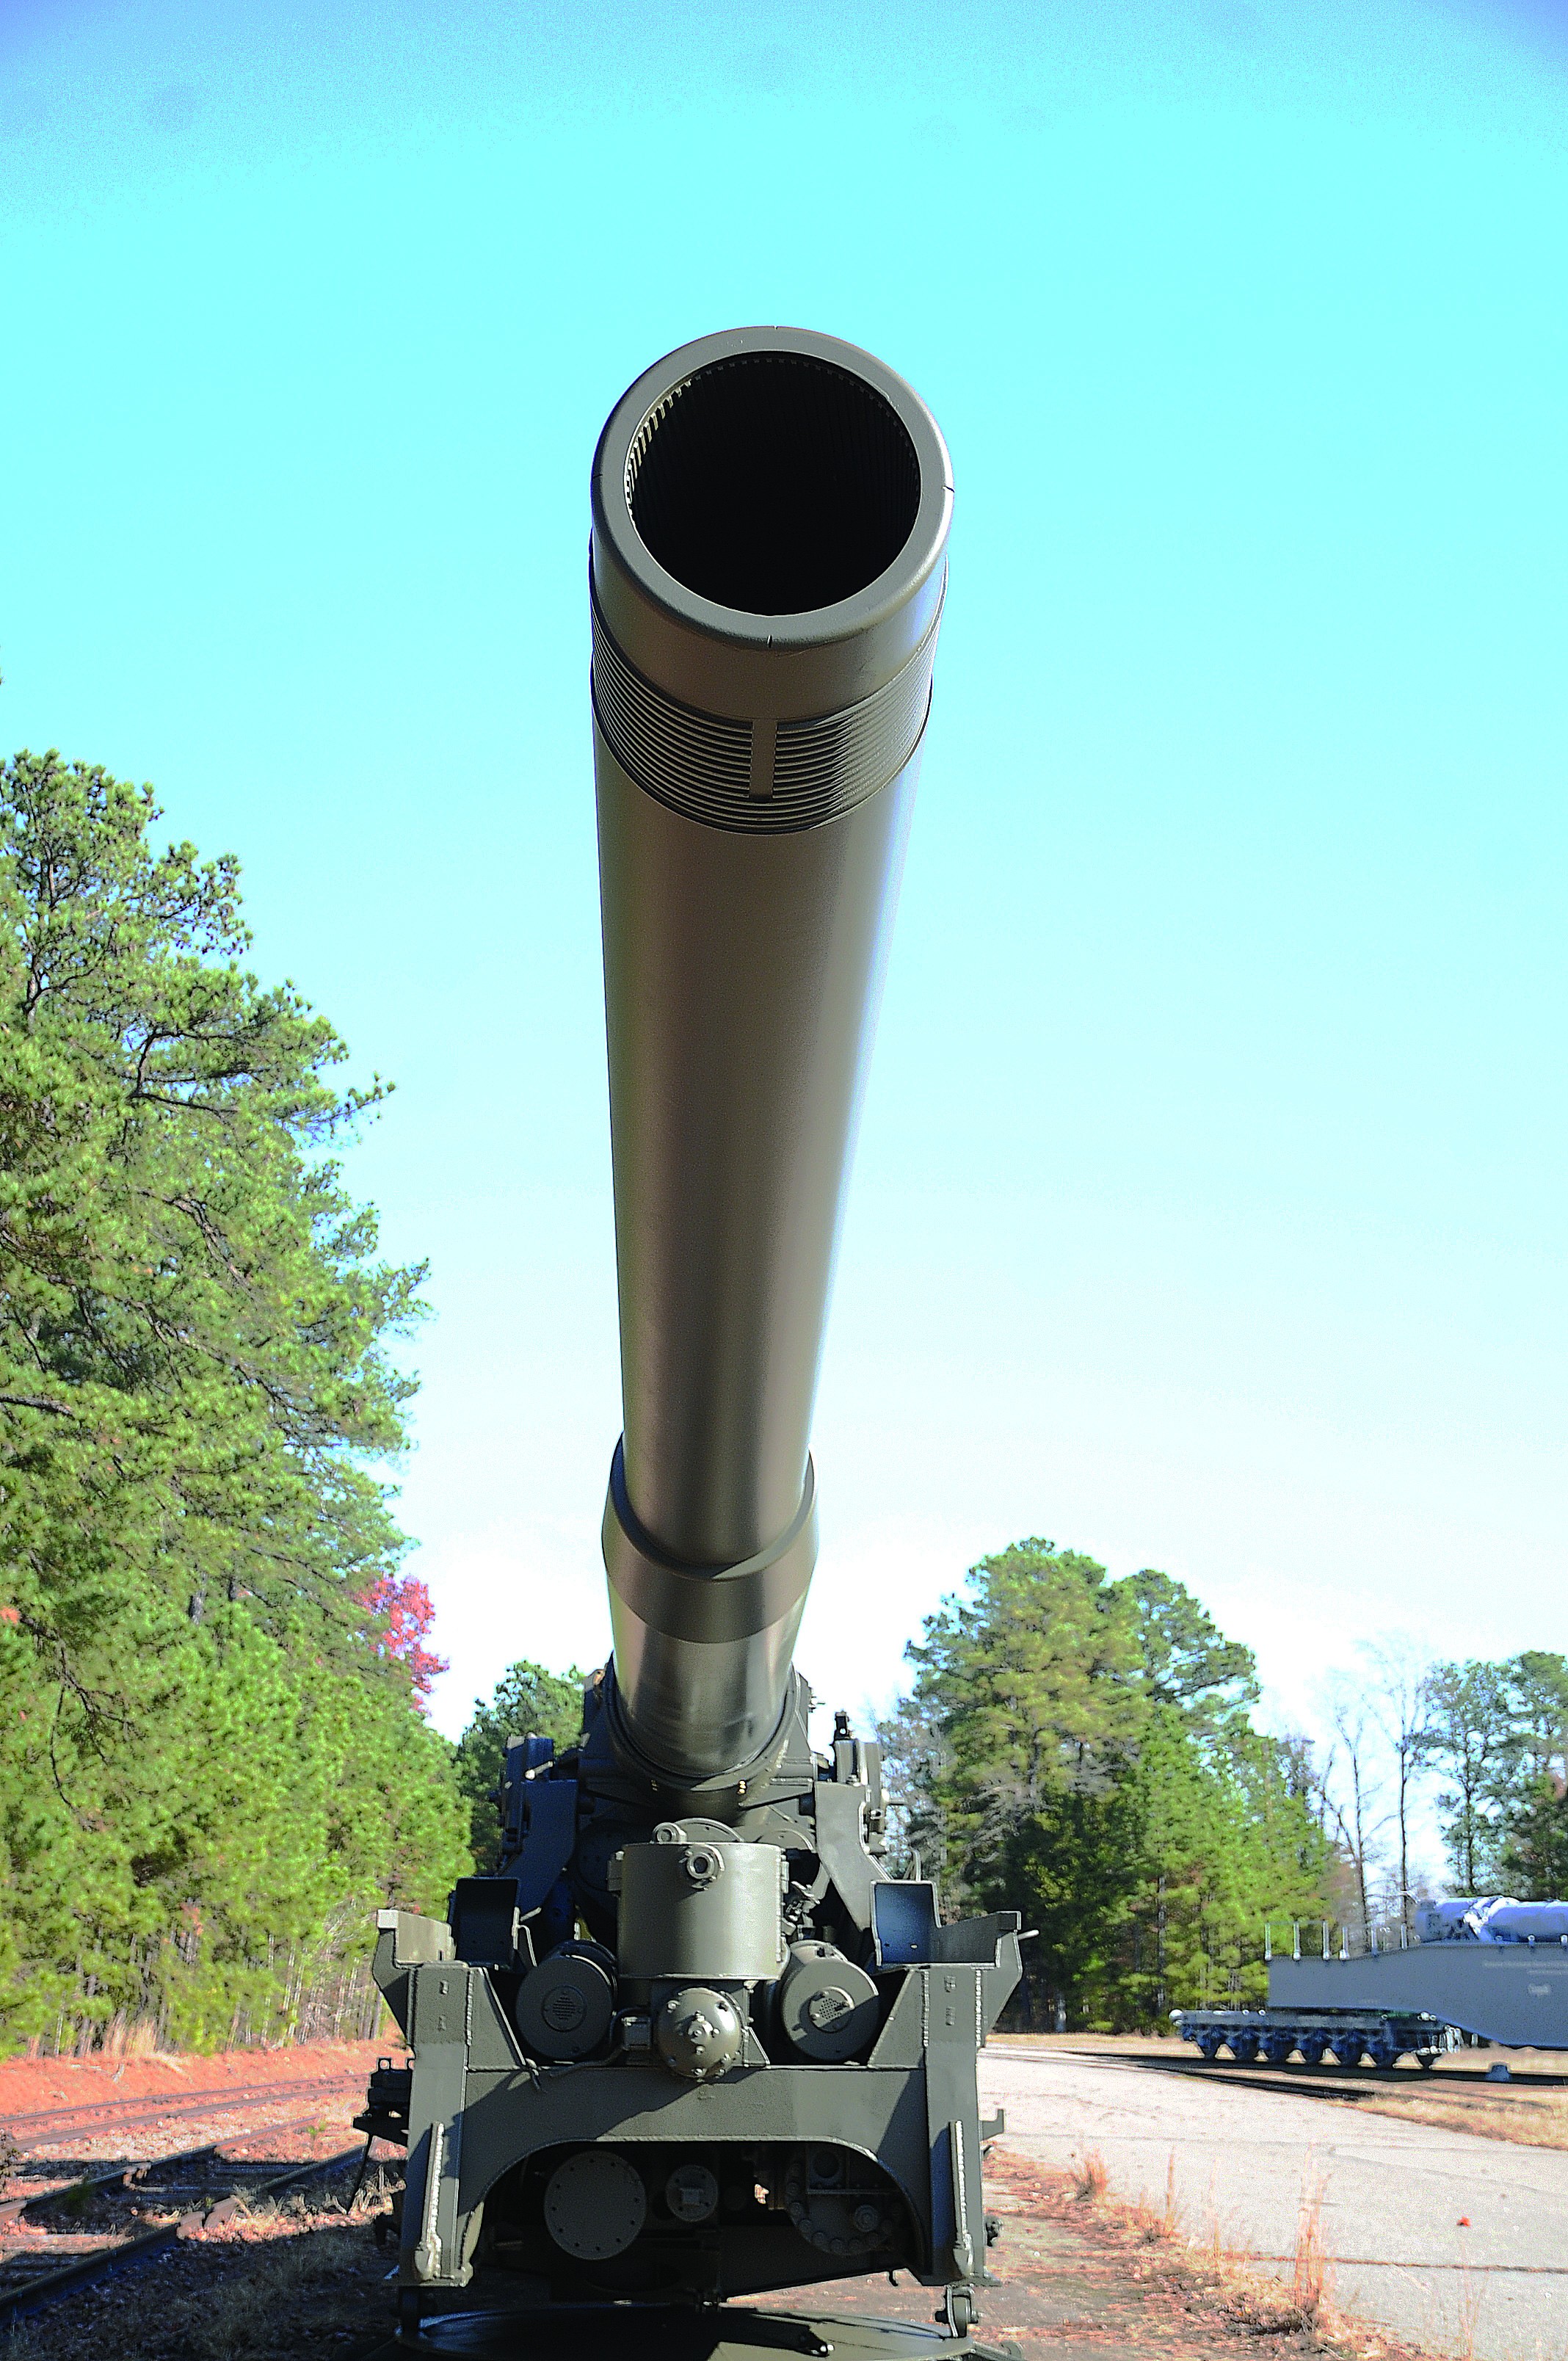 Nuclear-capable cannon makes its Fort Lee debut | Article | The United